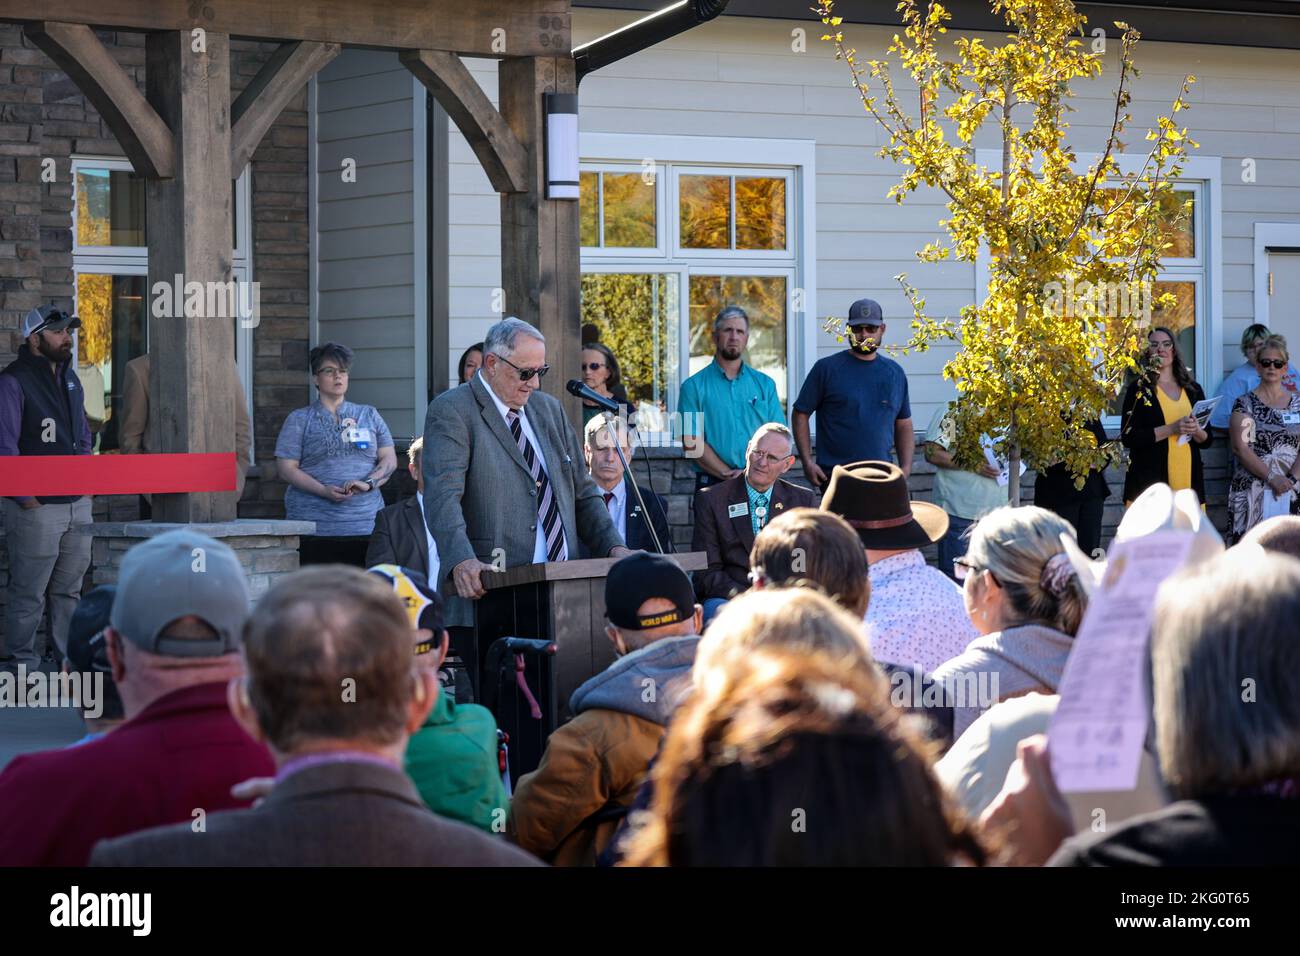 Commissioner Jack Tarter gives remarks as the Wyoming Veterans Home celebrated a grand opening ceremony for their new skilled nursing facility on the grounds in Buffalo, Wyo., on Oct. 20, 2022. The new facility provides residential care and treatment to veterans, their spouses, and Gold Star Families. Stock Photo